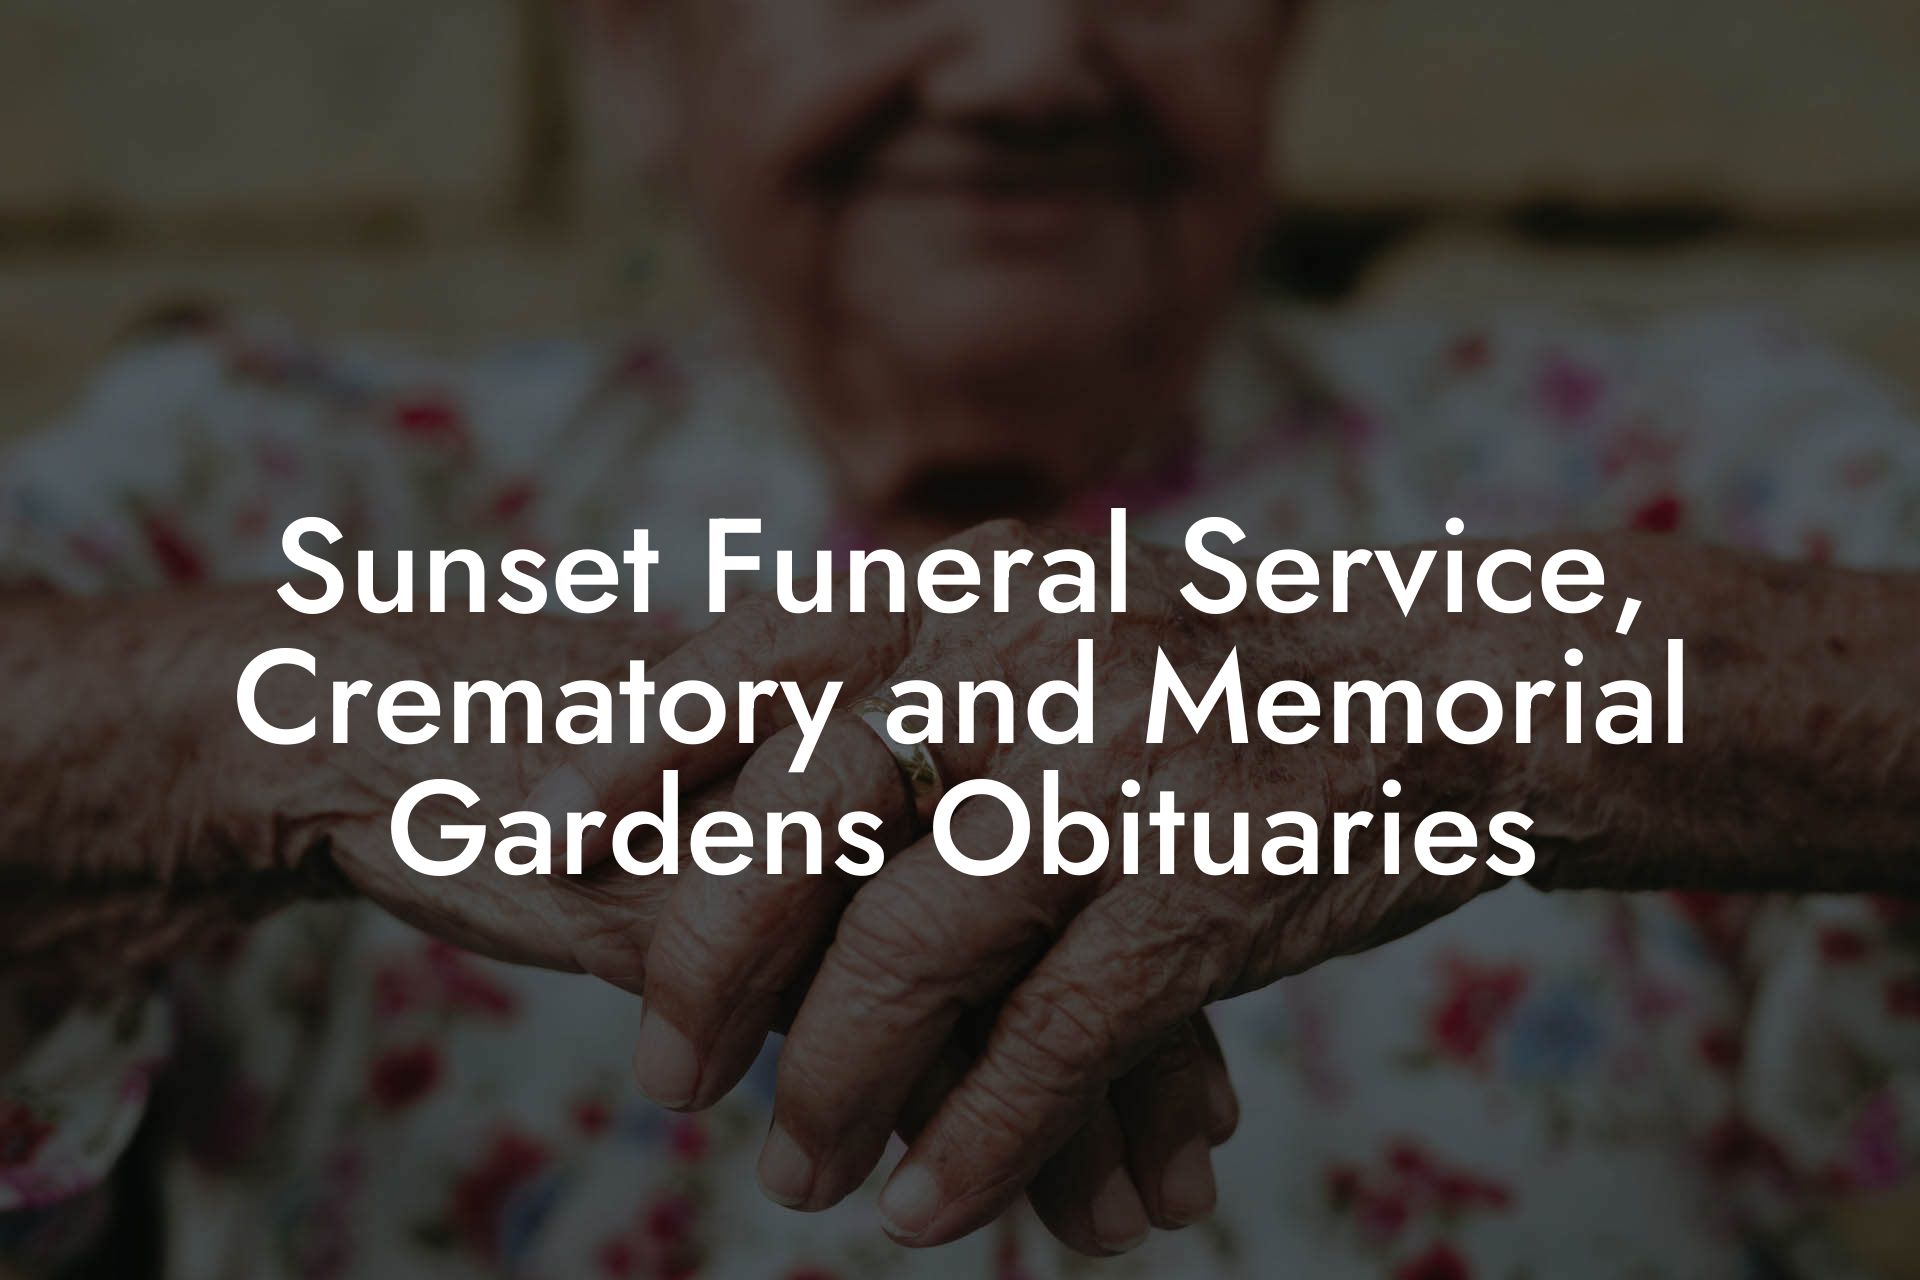 Sunset Funeral Service, Crematory and Memorial Gardens Obituaries